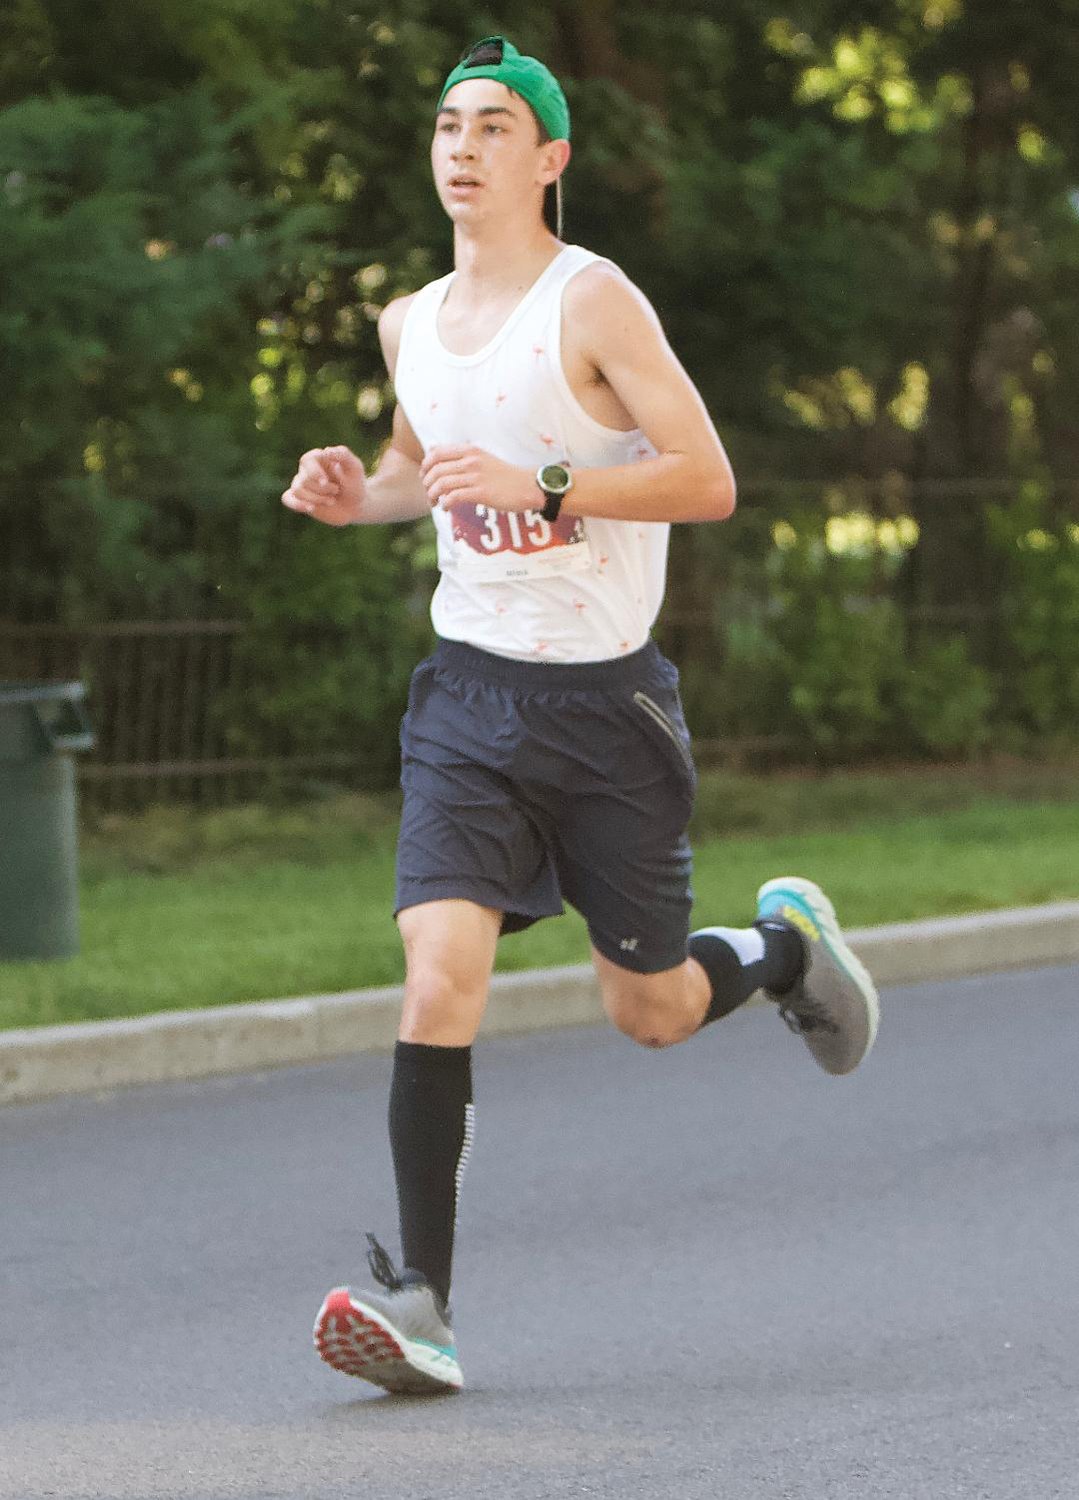 Bryce Stateler competes in the 5K race.